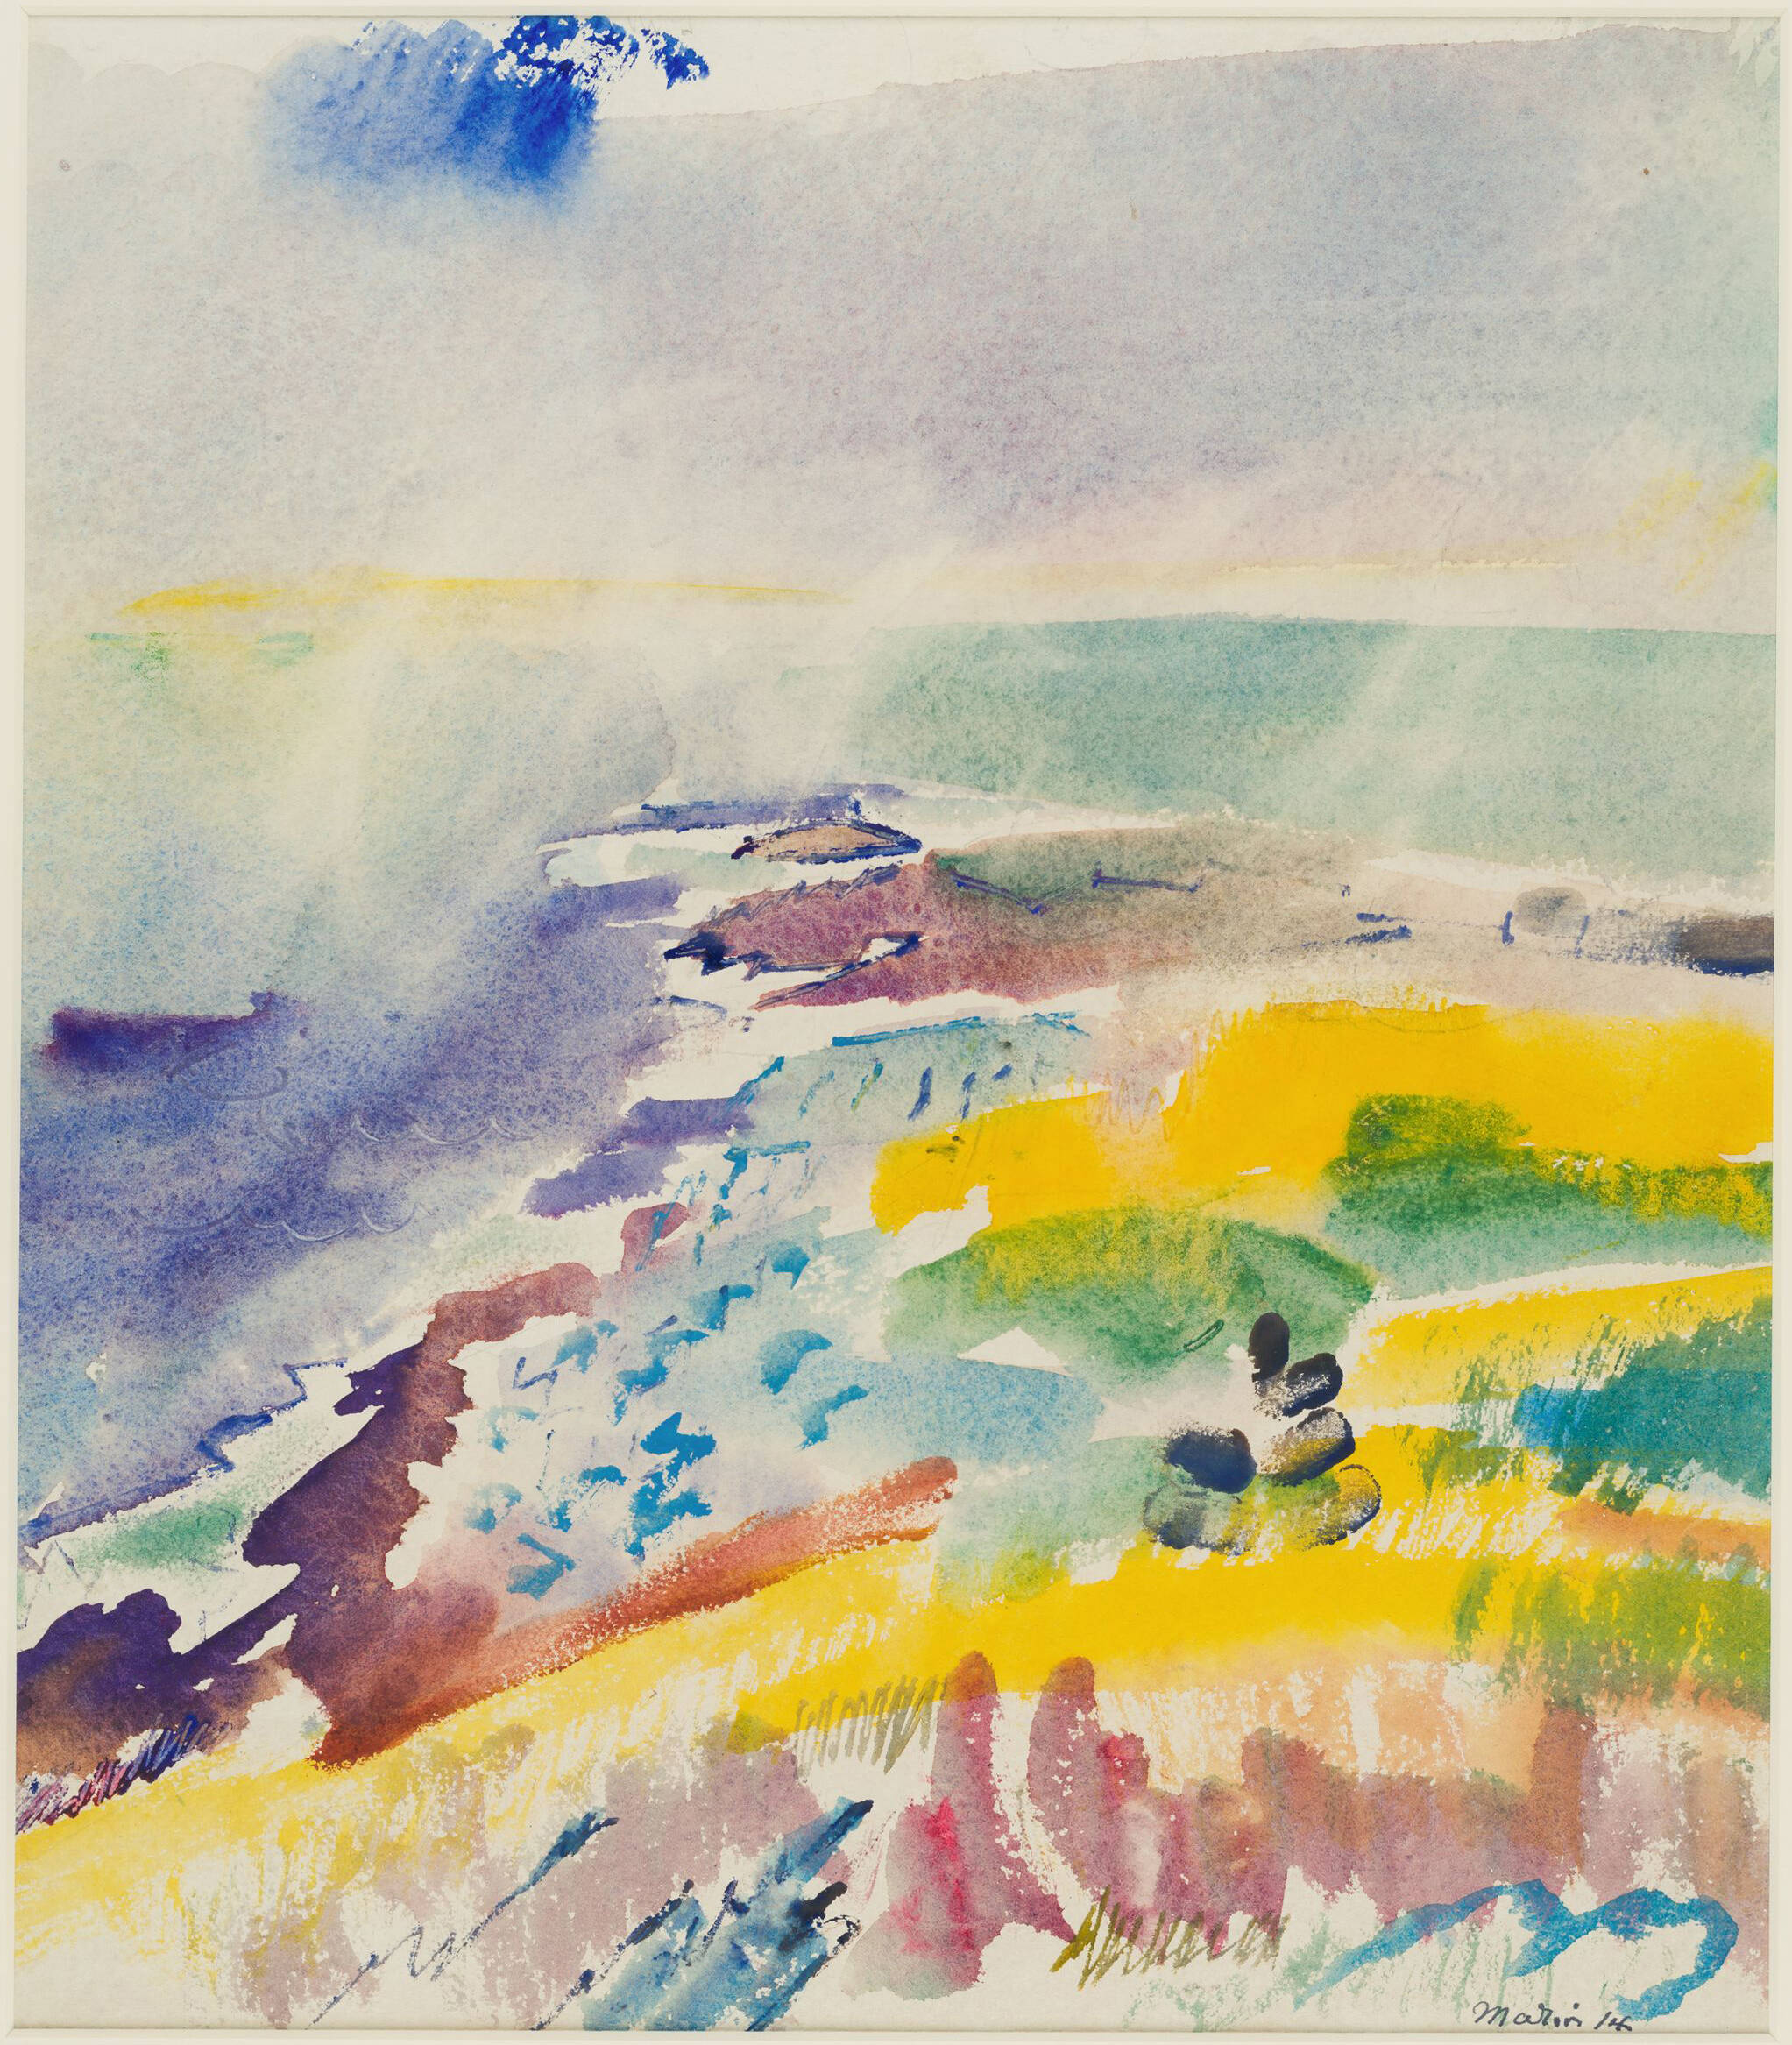 &quot;Seascape&quot;, 1914 by John Marin (Courtesy of the Harvard Art Museums)